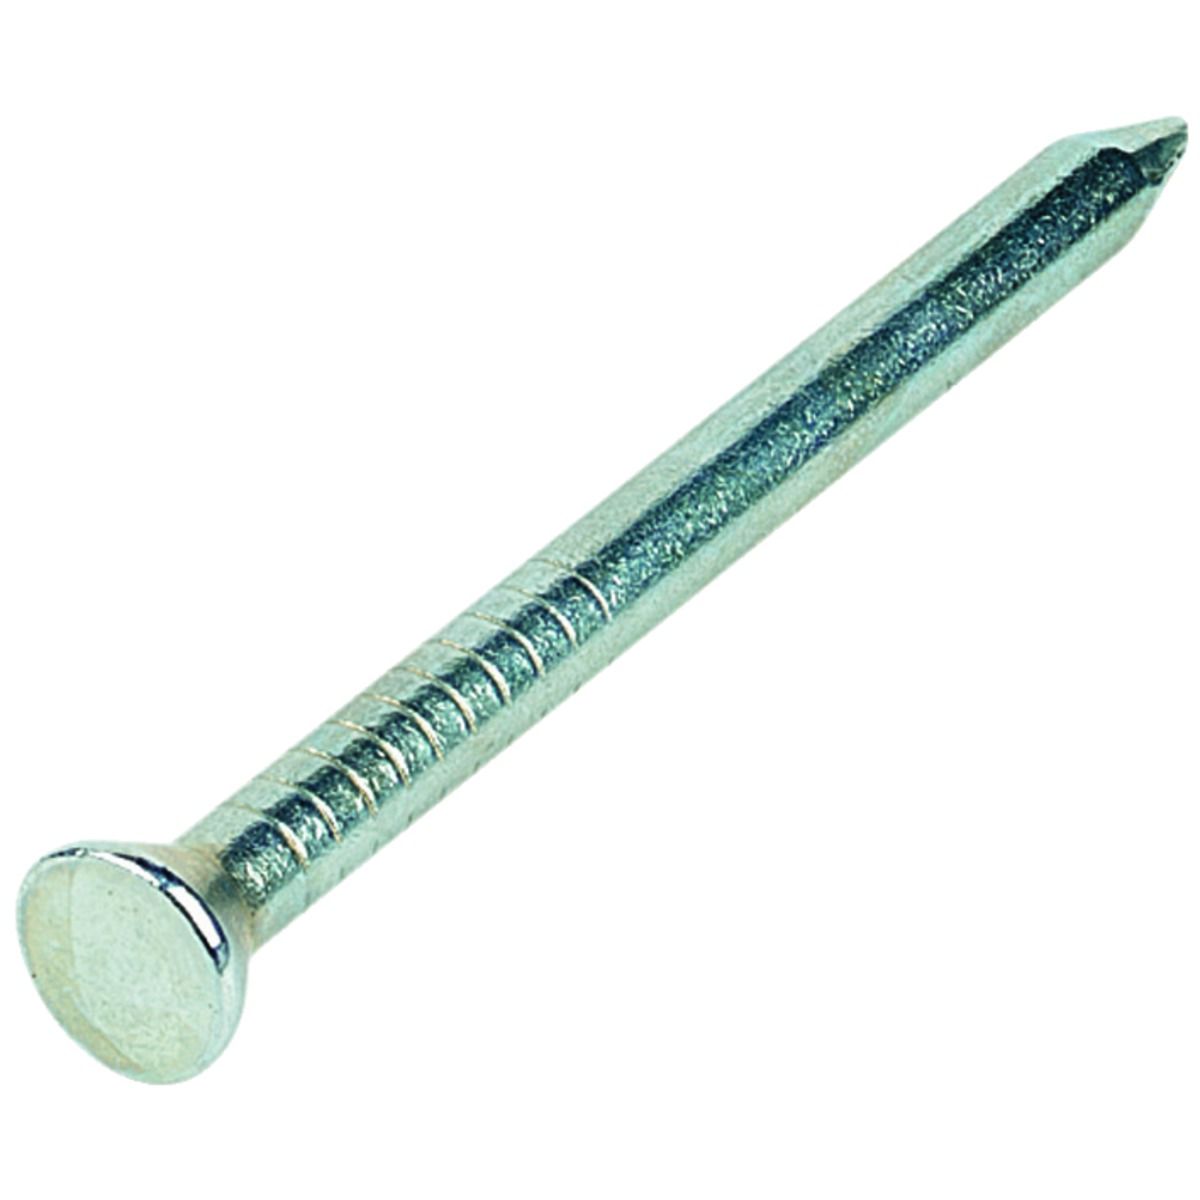 Image of Wickes 60mm Countersunk Head Masonry Nails - Pack of 50